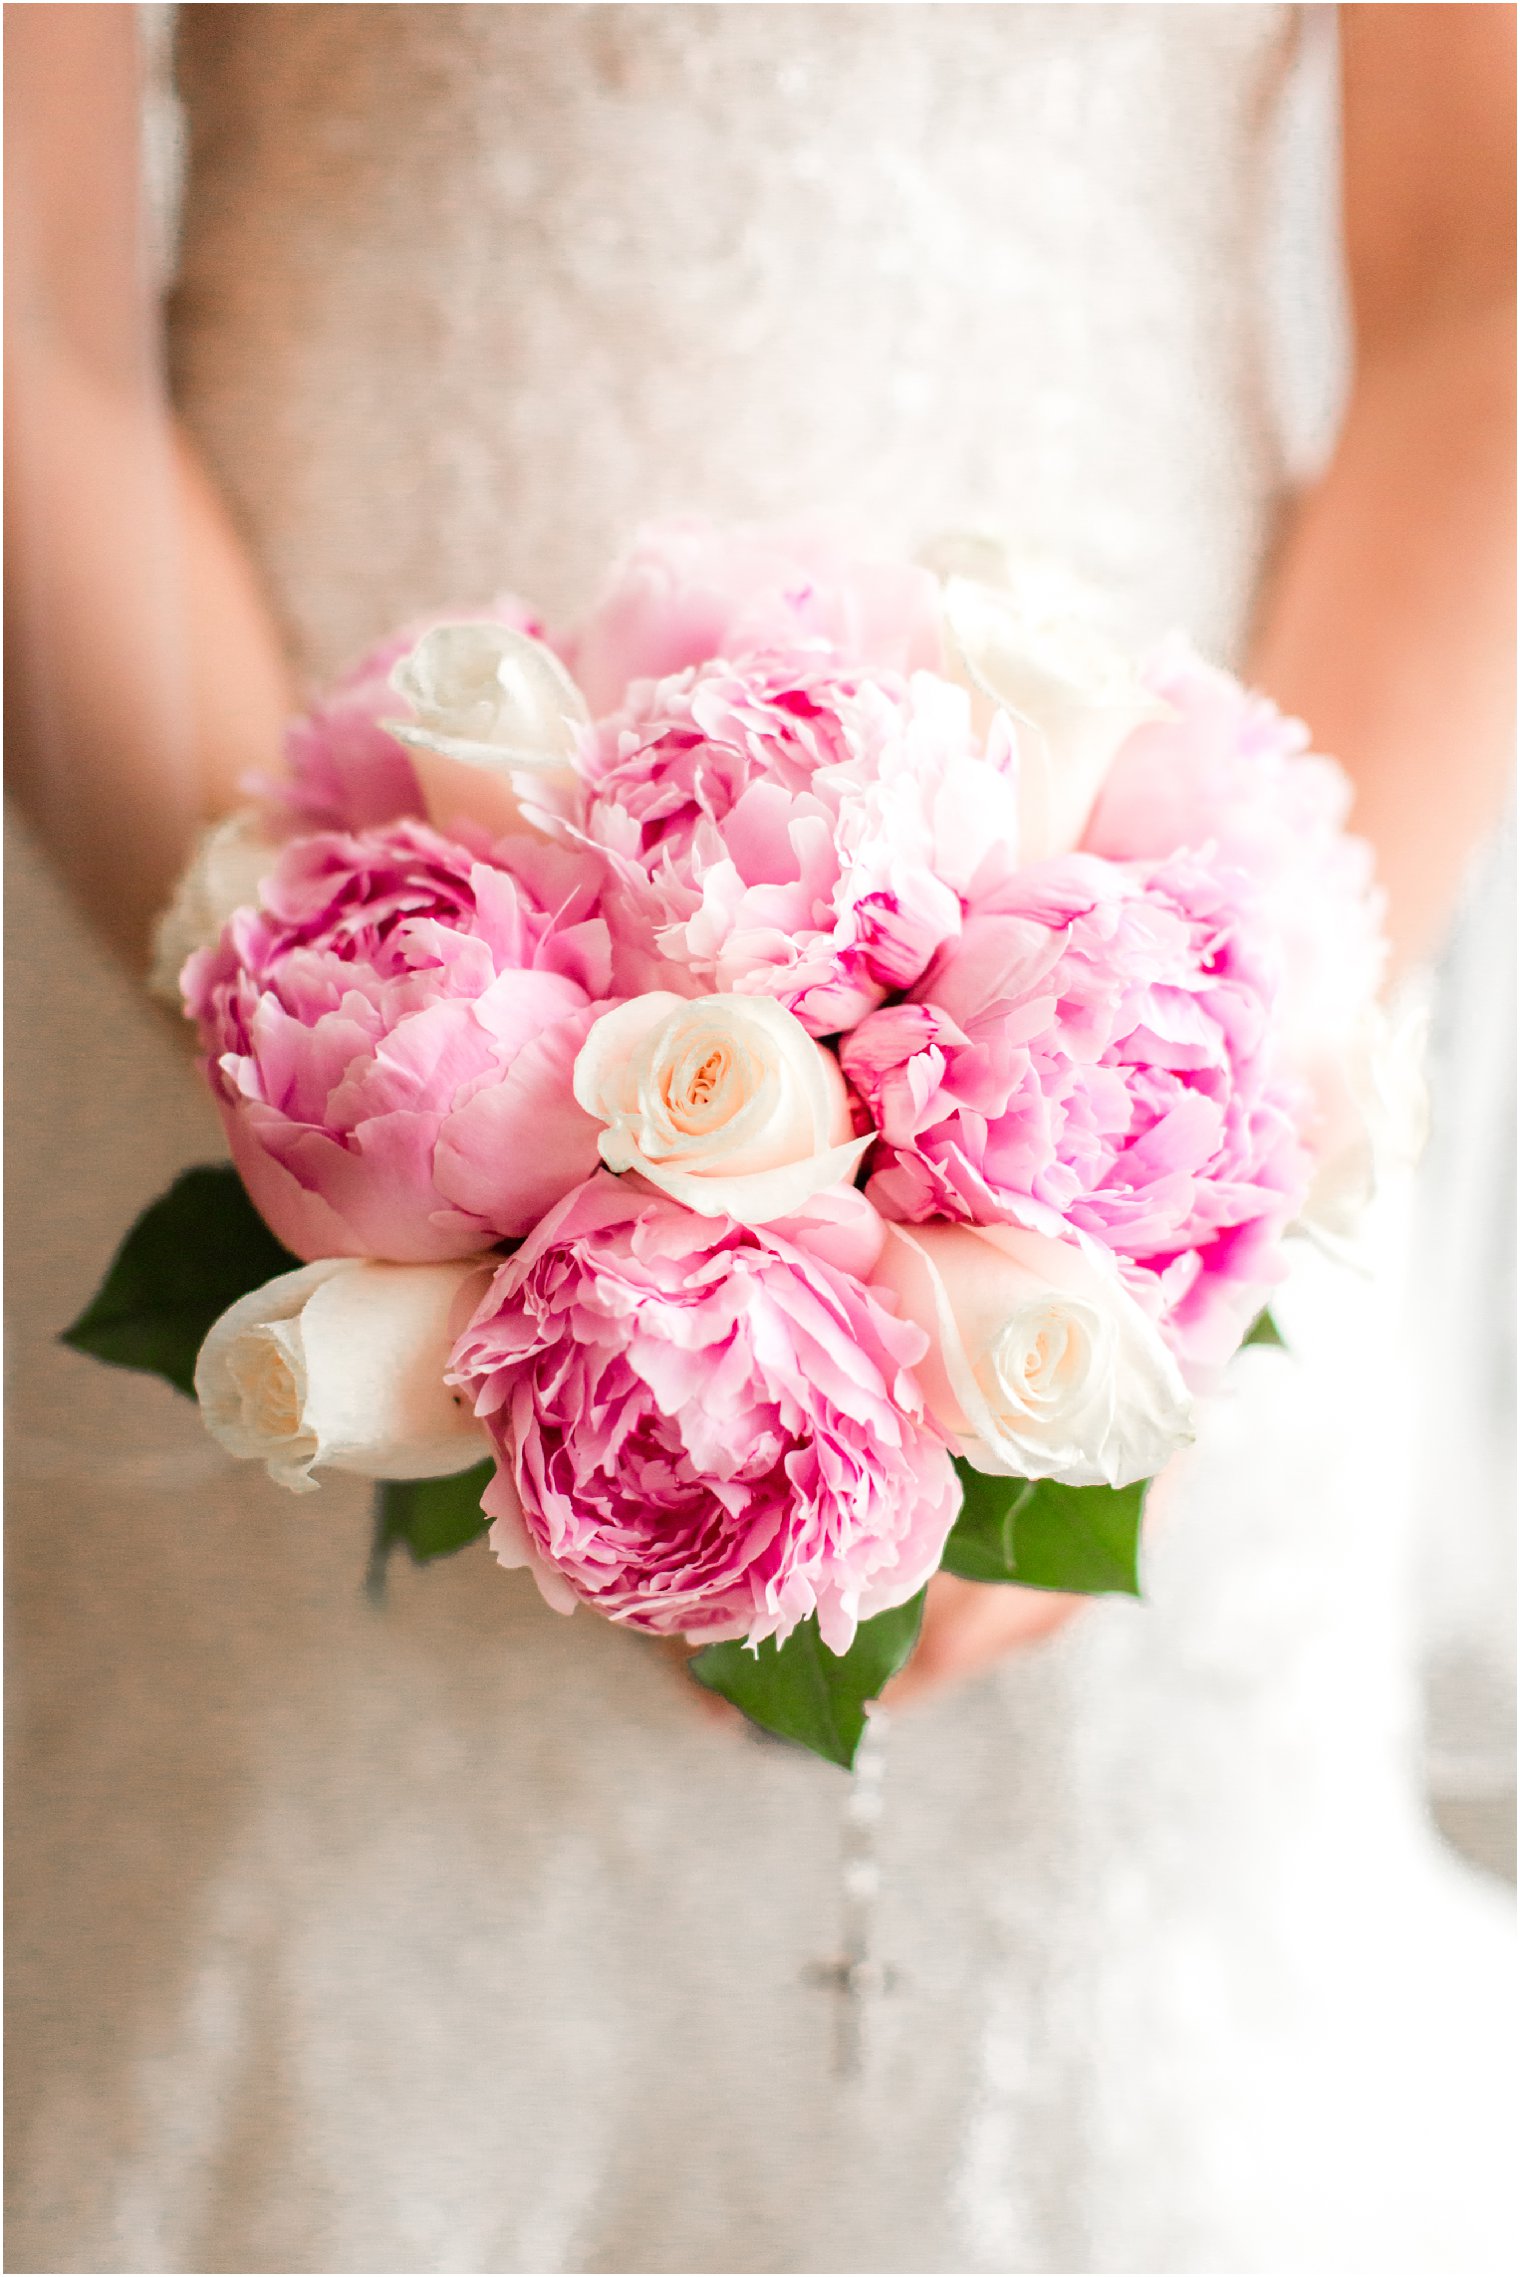 Bridal bouquet with peonies and white roses | Photo by Idalia Photography